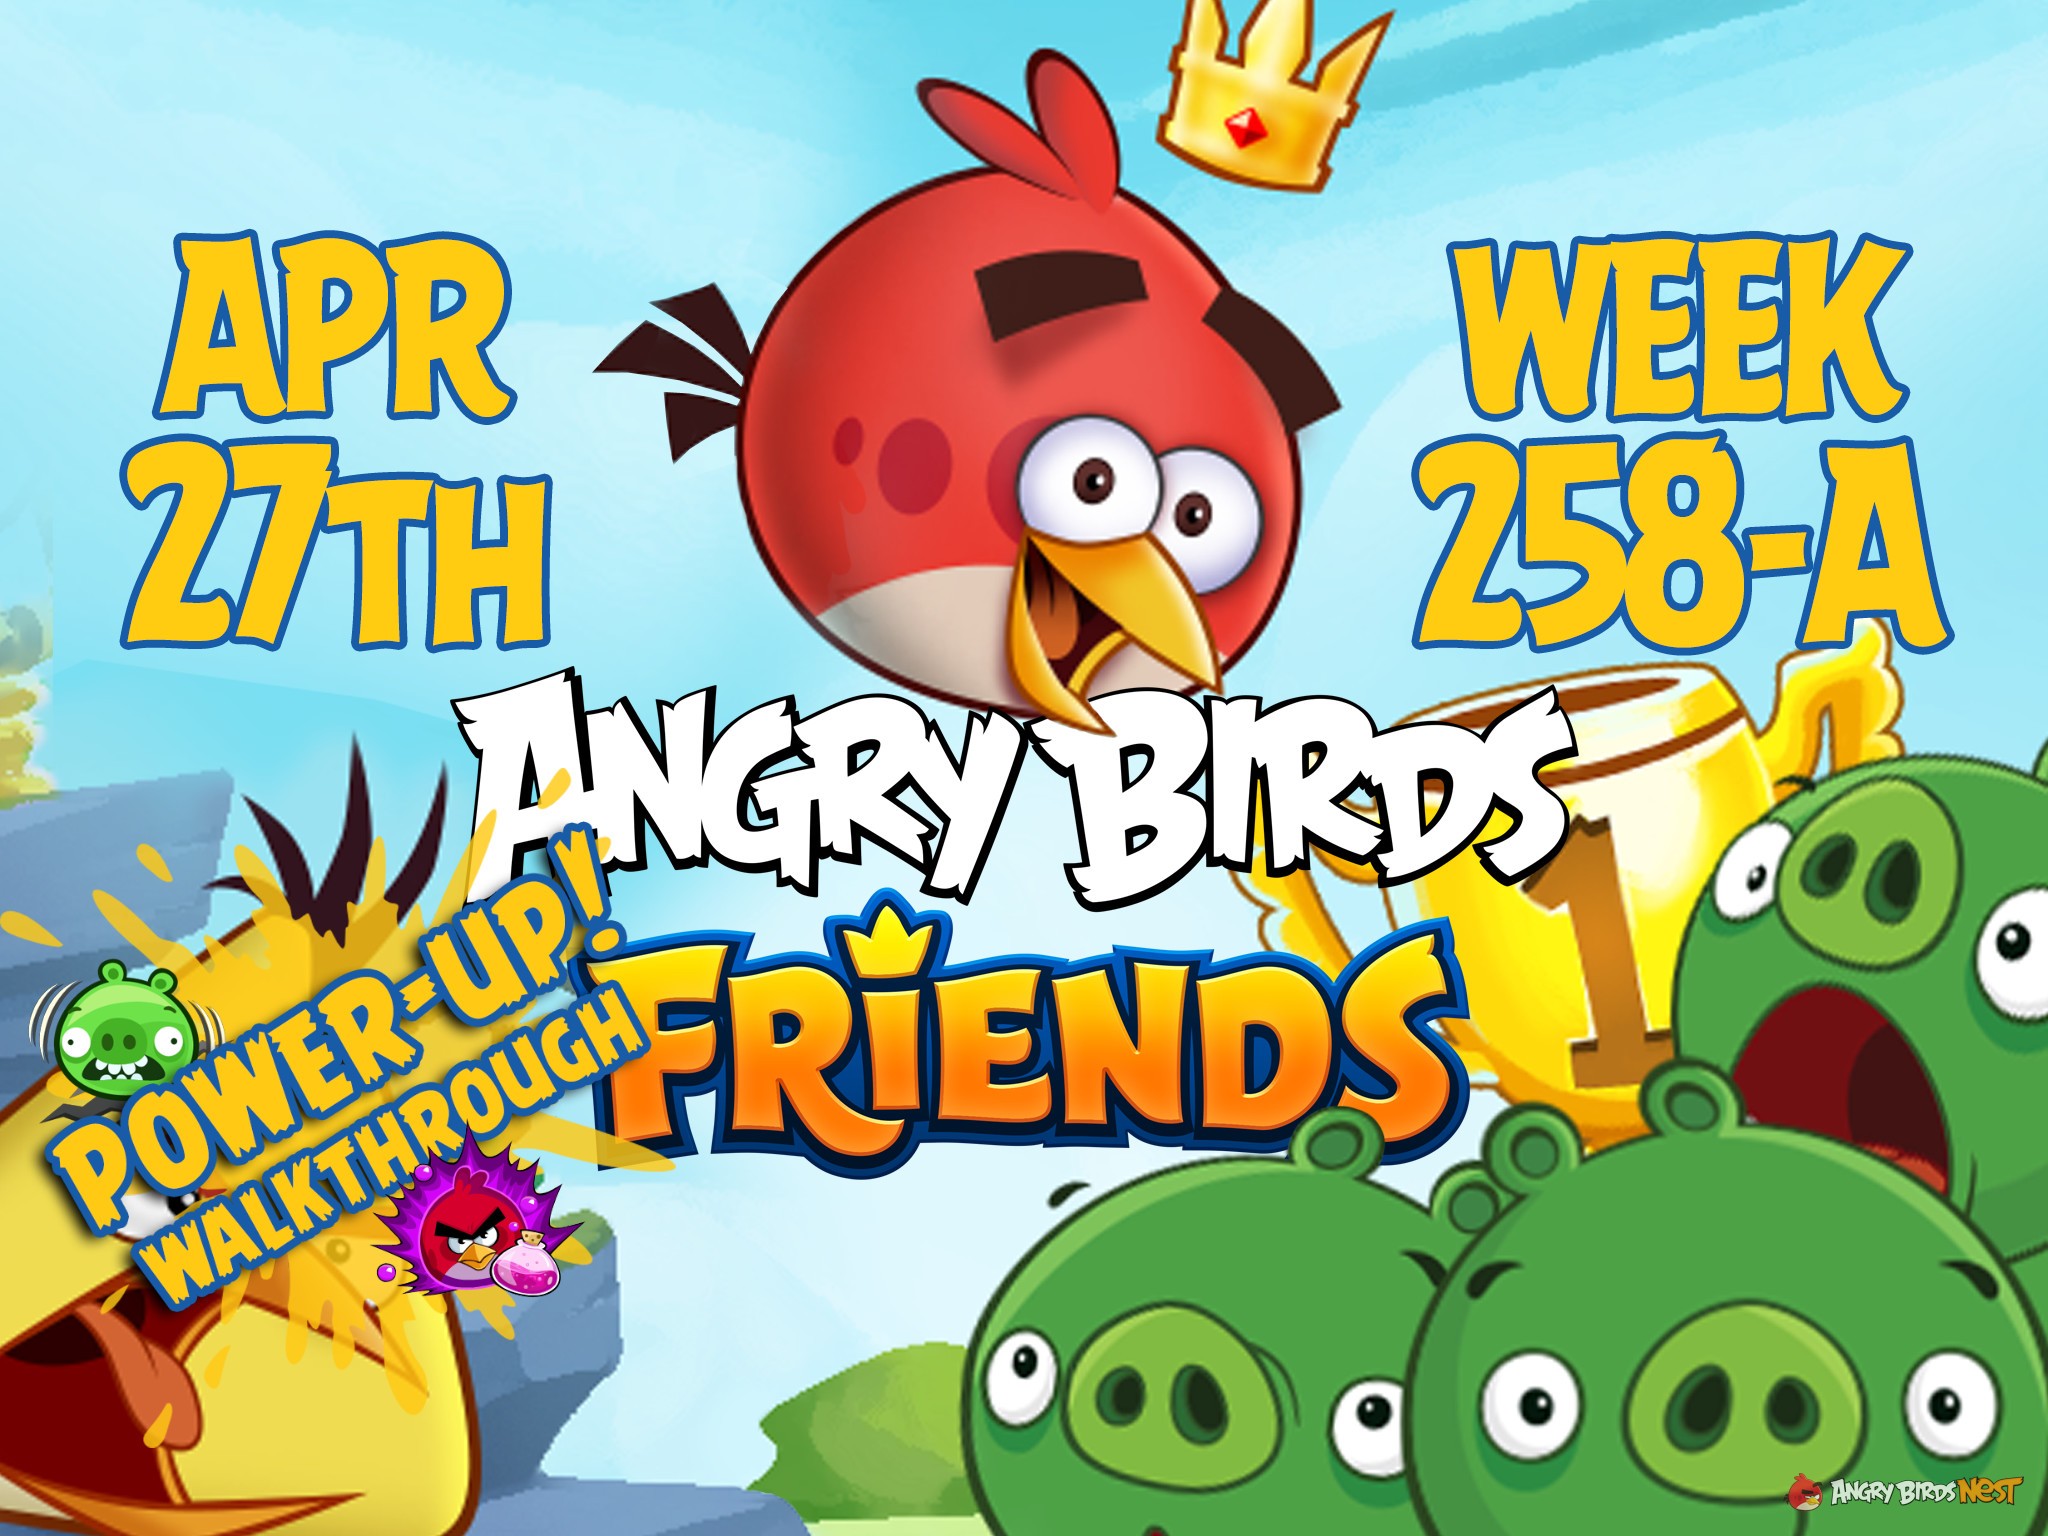 Angry Birds Friends Tournament Week 258-A Feature Image PU